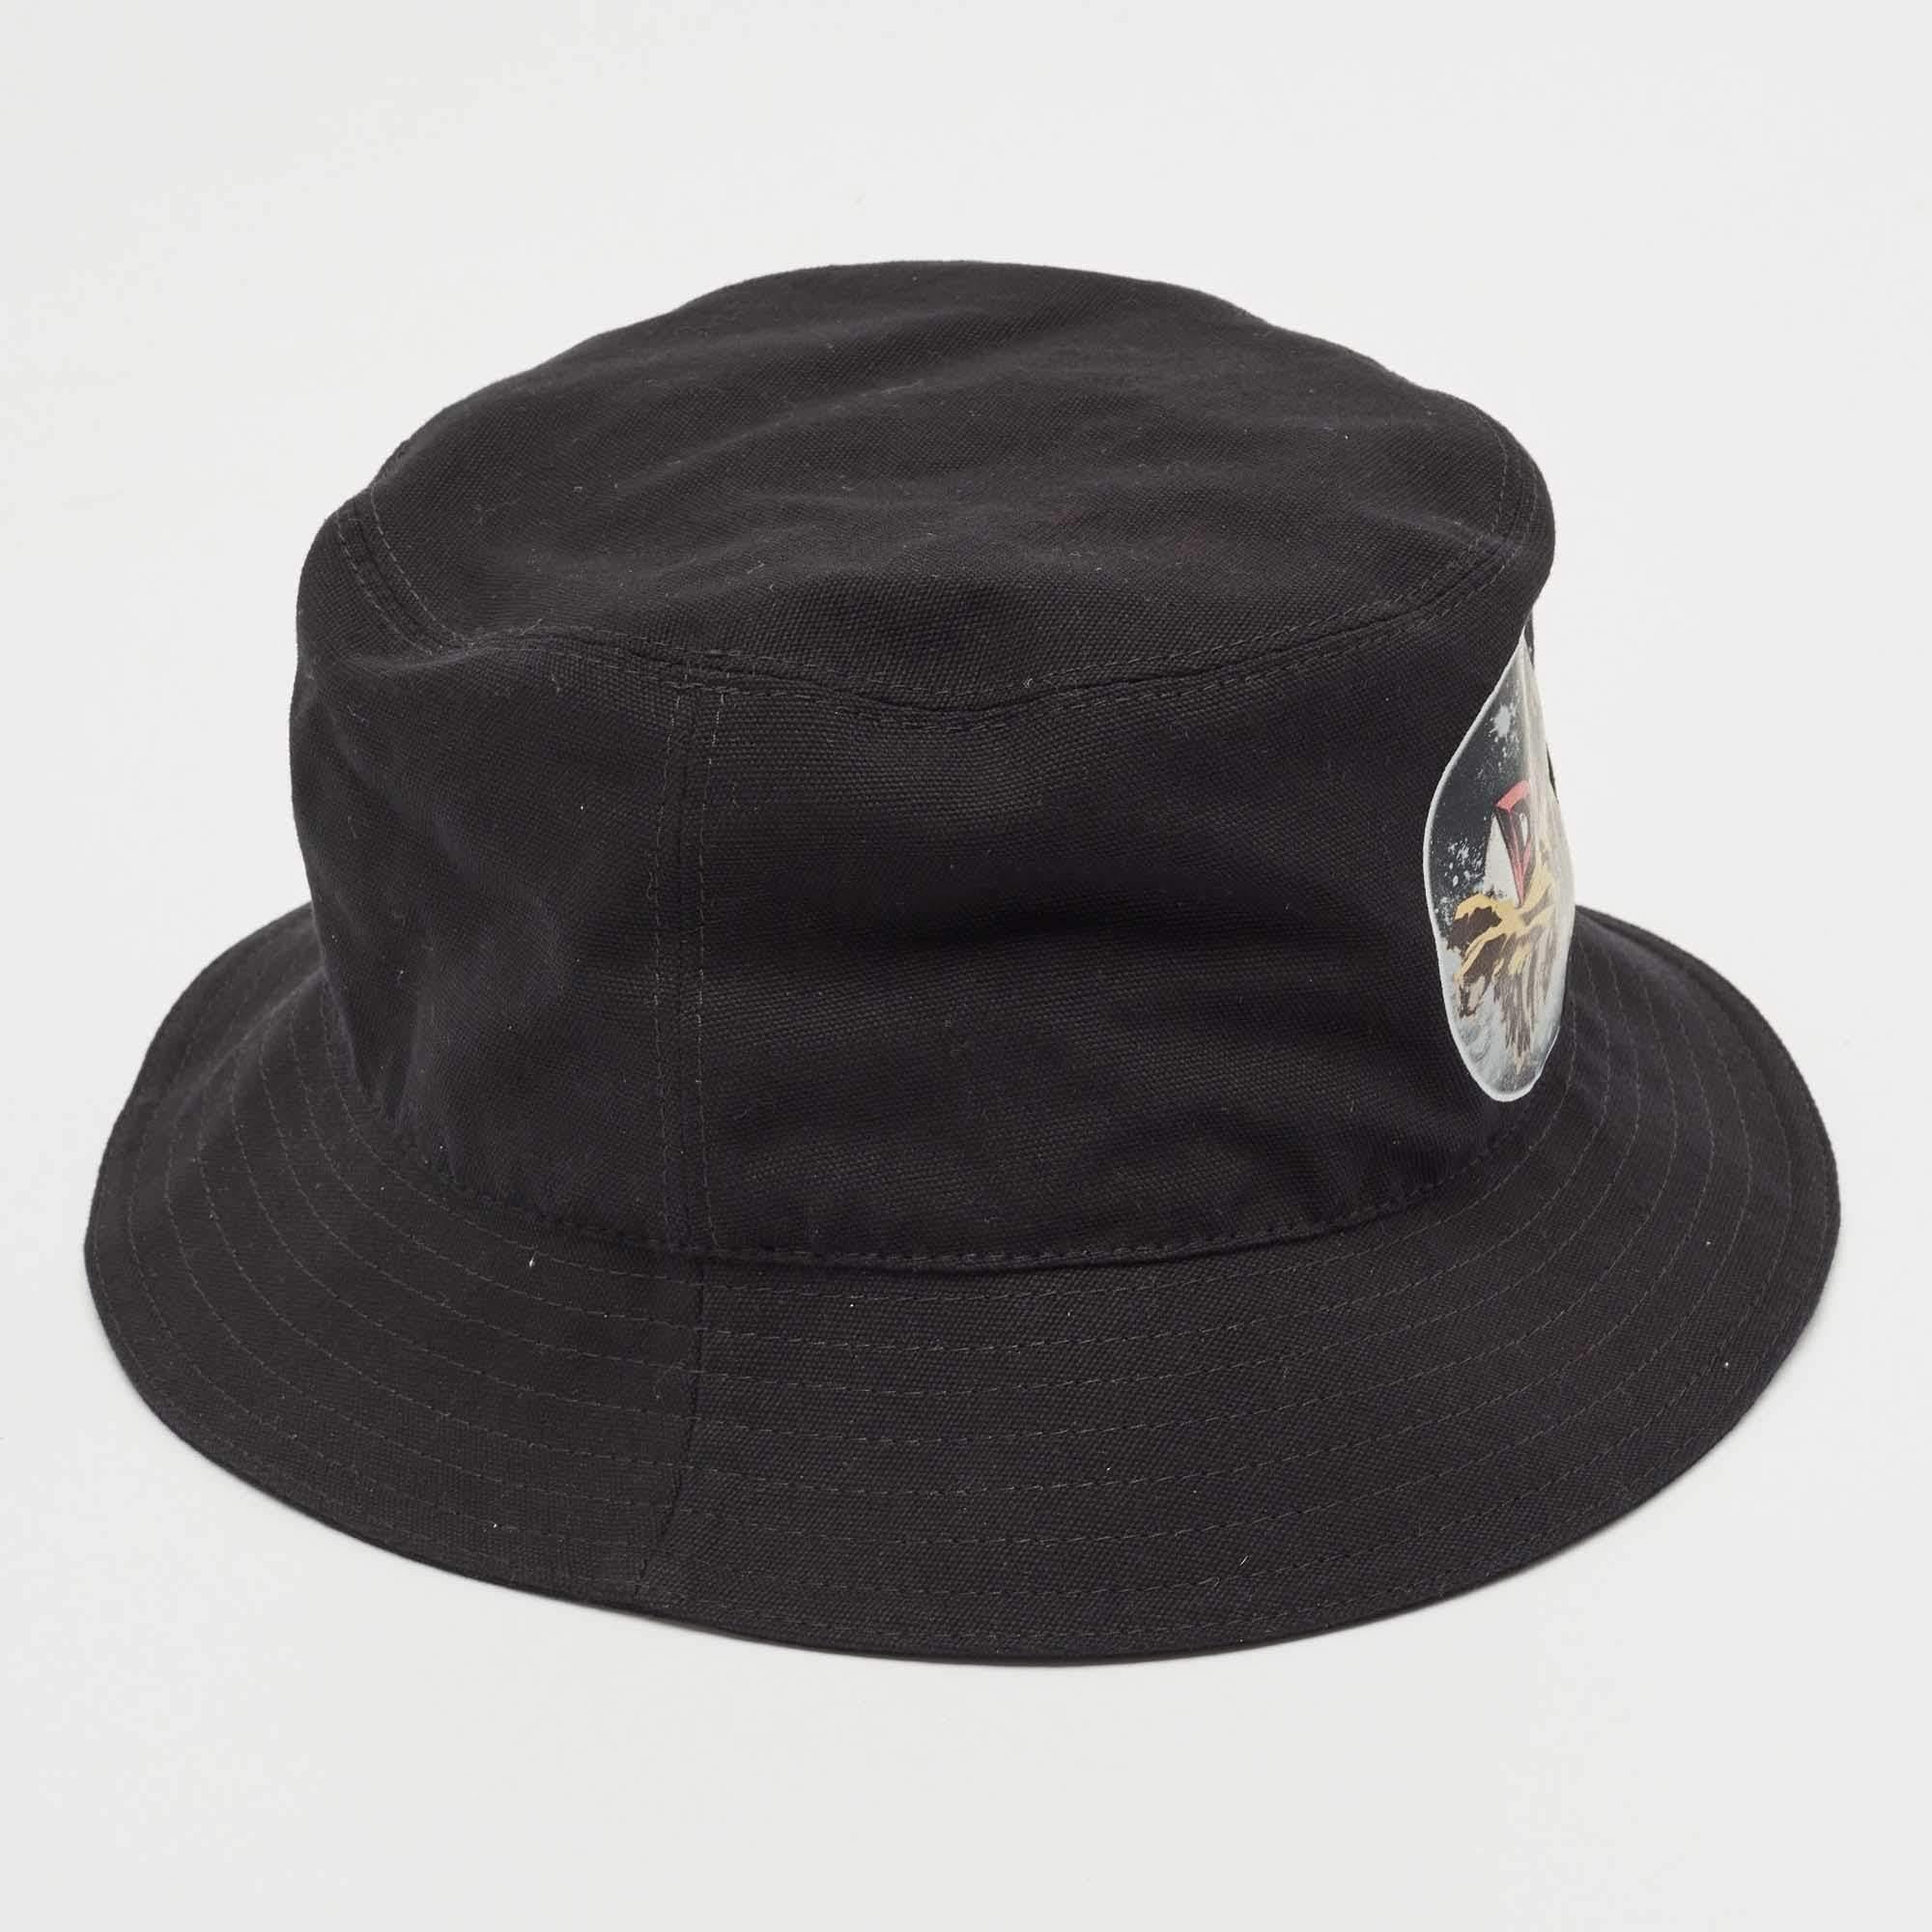 This Dior Homme bucket hat is a fashion accessory that will fit well in your casual wardrobe. Crafted from quality materials, the hat carries a black color with a print on the front.

